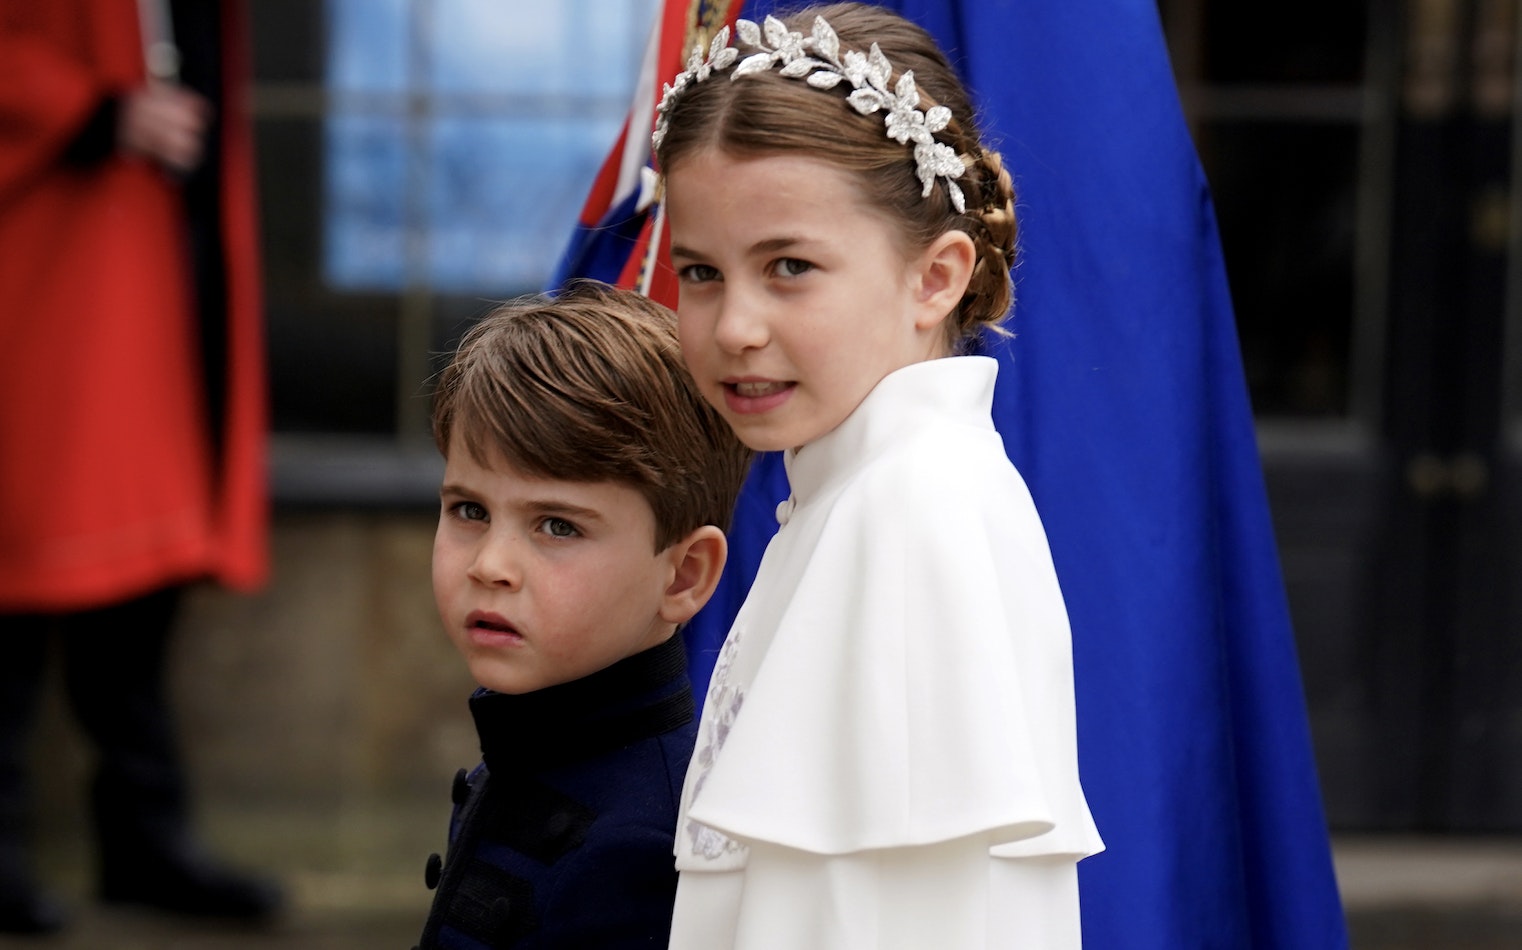 Princess Charlotte's Coronation Outfit Was The Perfect 'Mini Me' Moment